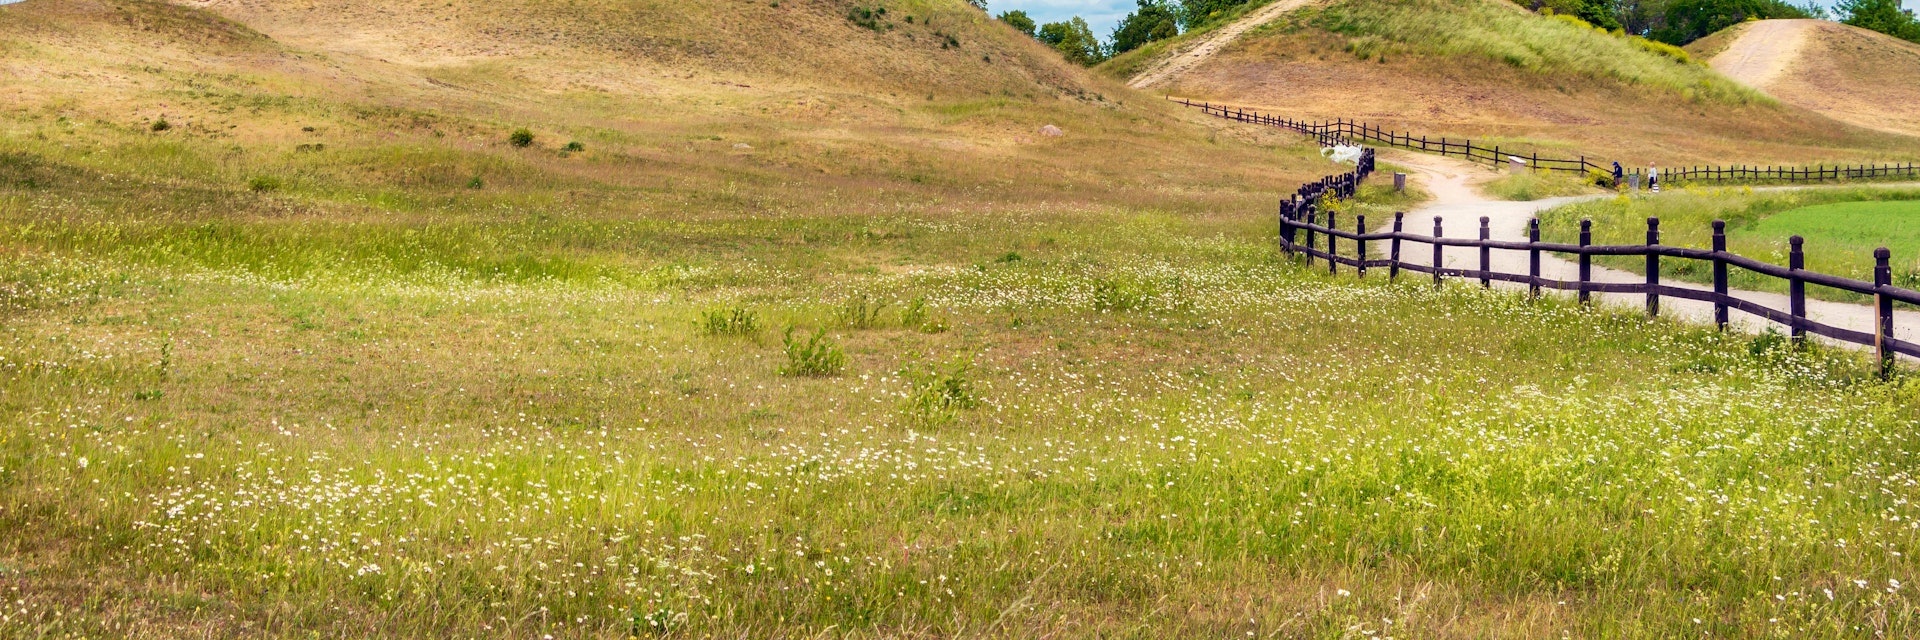 Royal Mounds - large barrows located in Gamla Uppsala village, Uppland, Sweden (70 km from Stockholm).  Beautiful Viking graves covered by grass. Gamla Uppsala is area rich in archaeological remains.; Shutterstock ID 1138429115; your: Bridget Brown; gl: 65050; netsuite: Online Editorial; full: POI Image Update